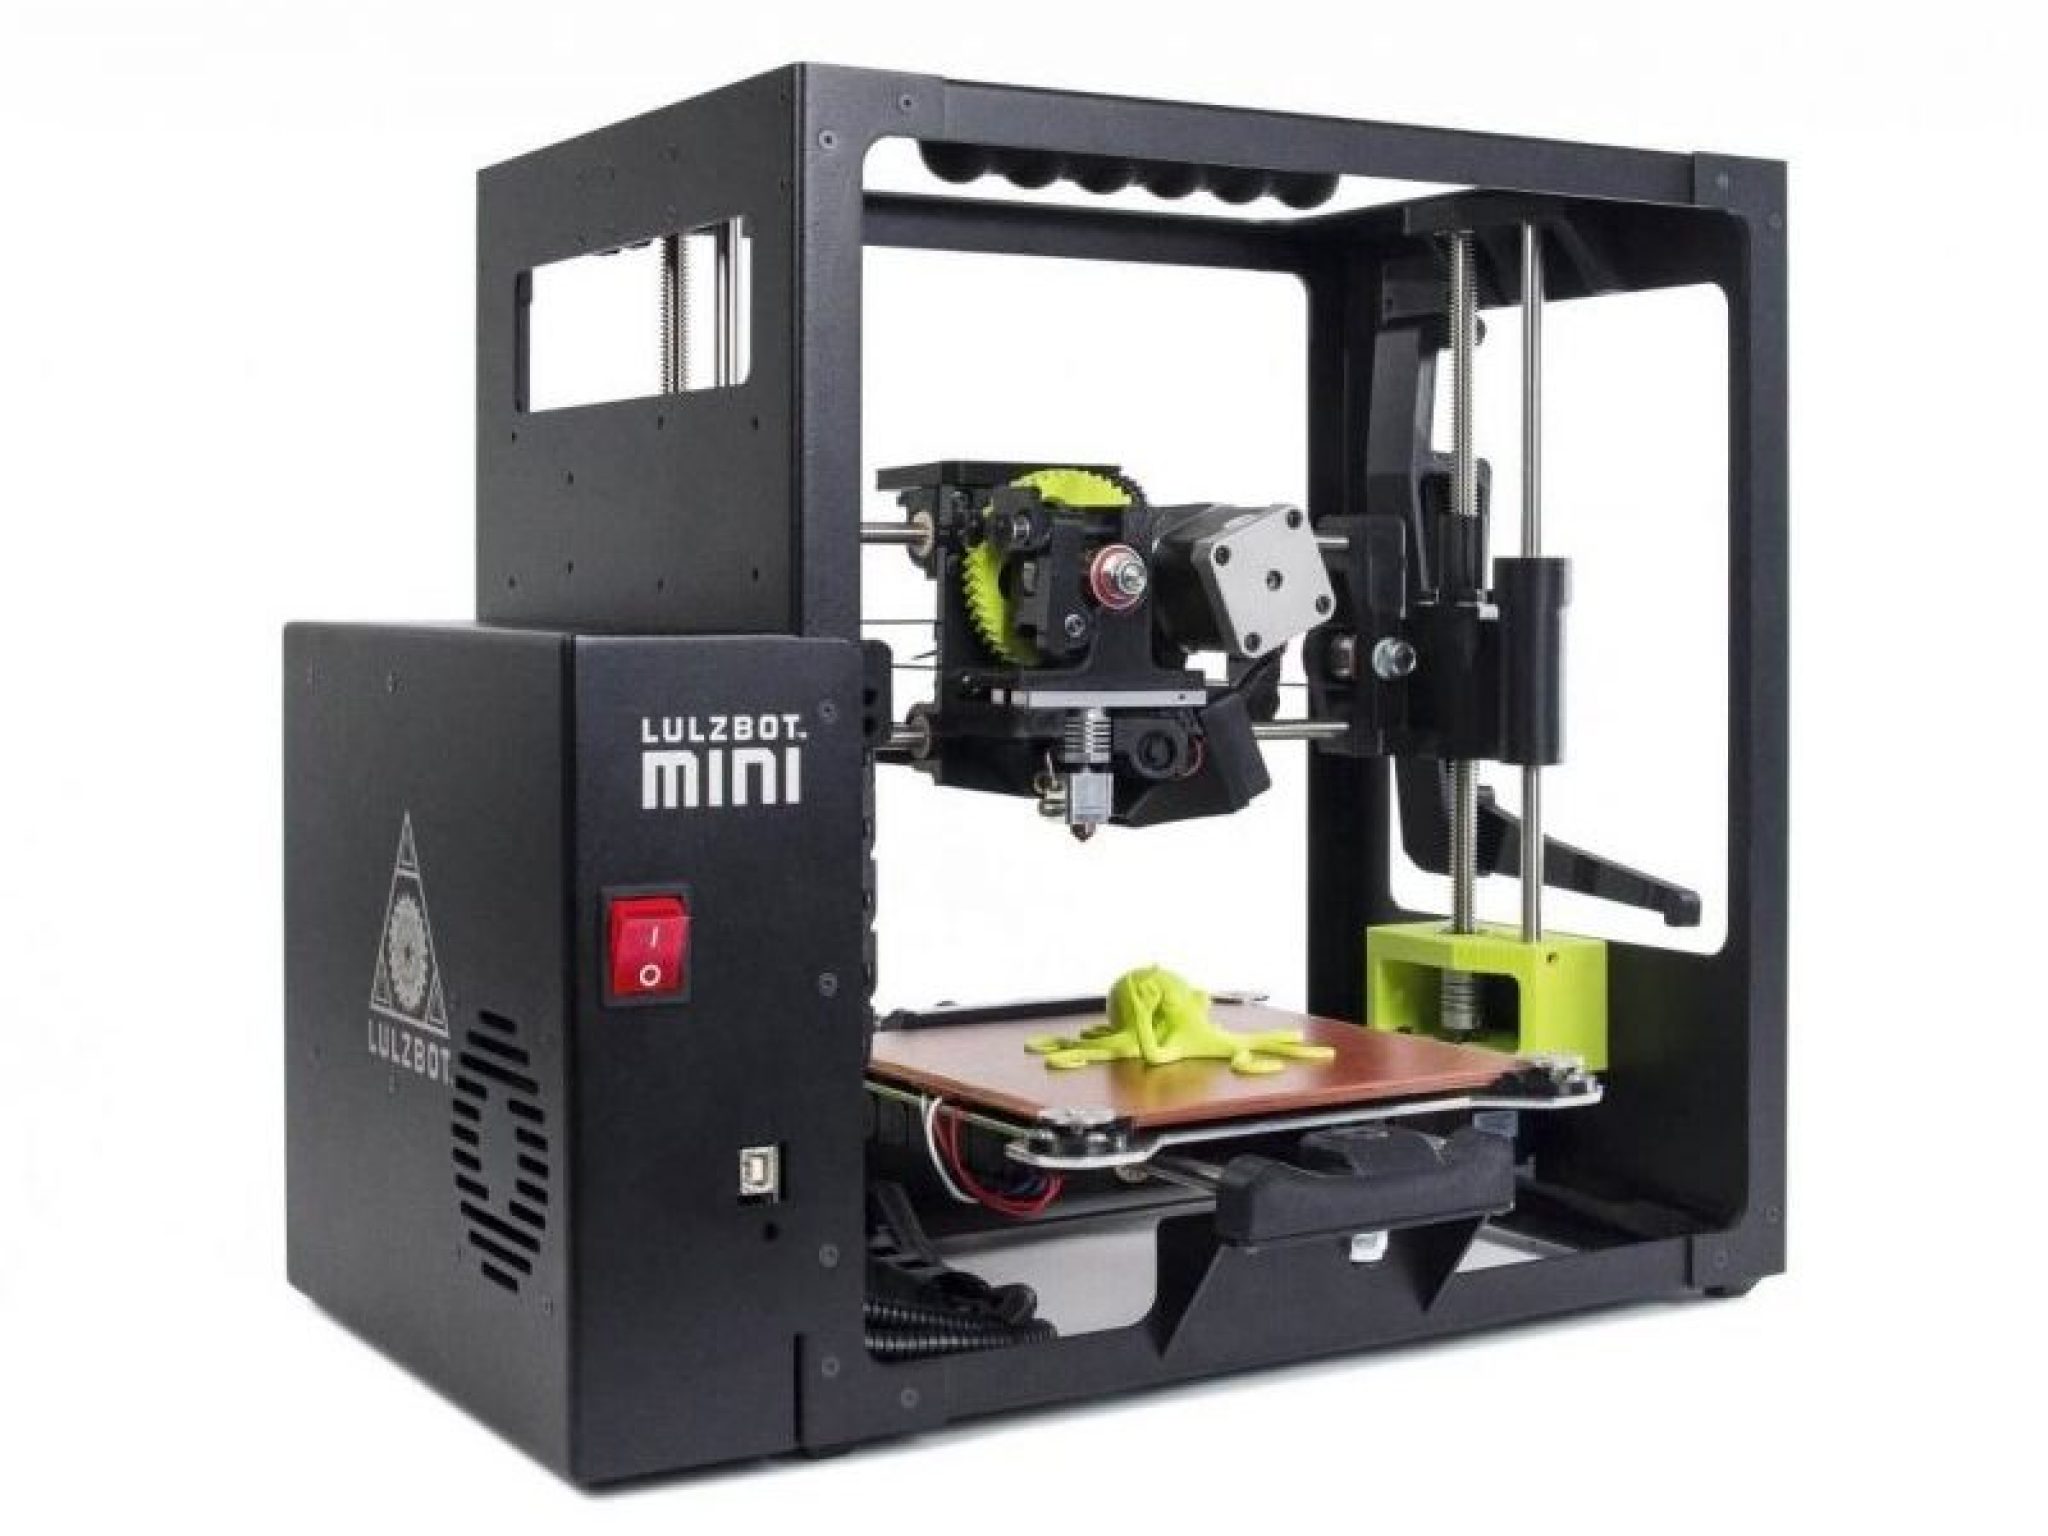 The 15 Best 3D Printers for Beginners (Updated Aug, 2021) Pick 3D Printer